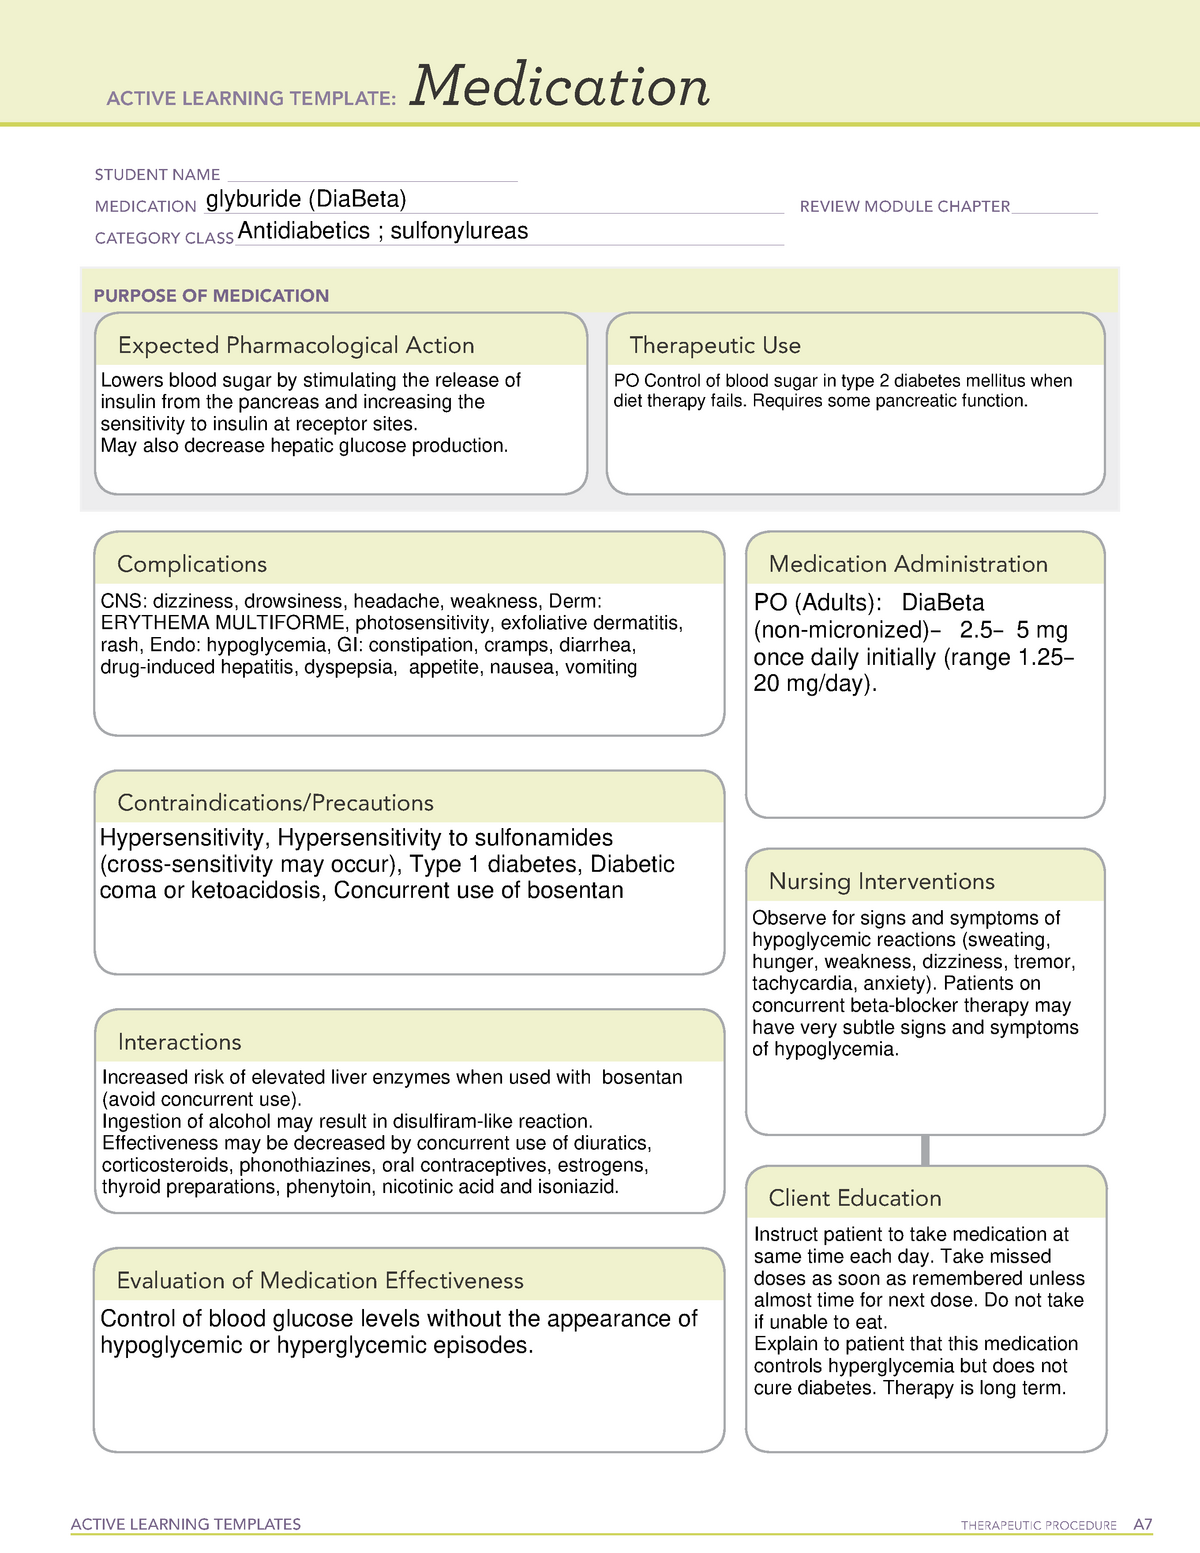 medication-glyburide-active-learning-templates-therapeutic